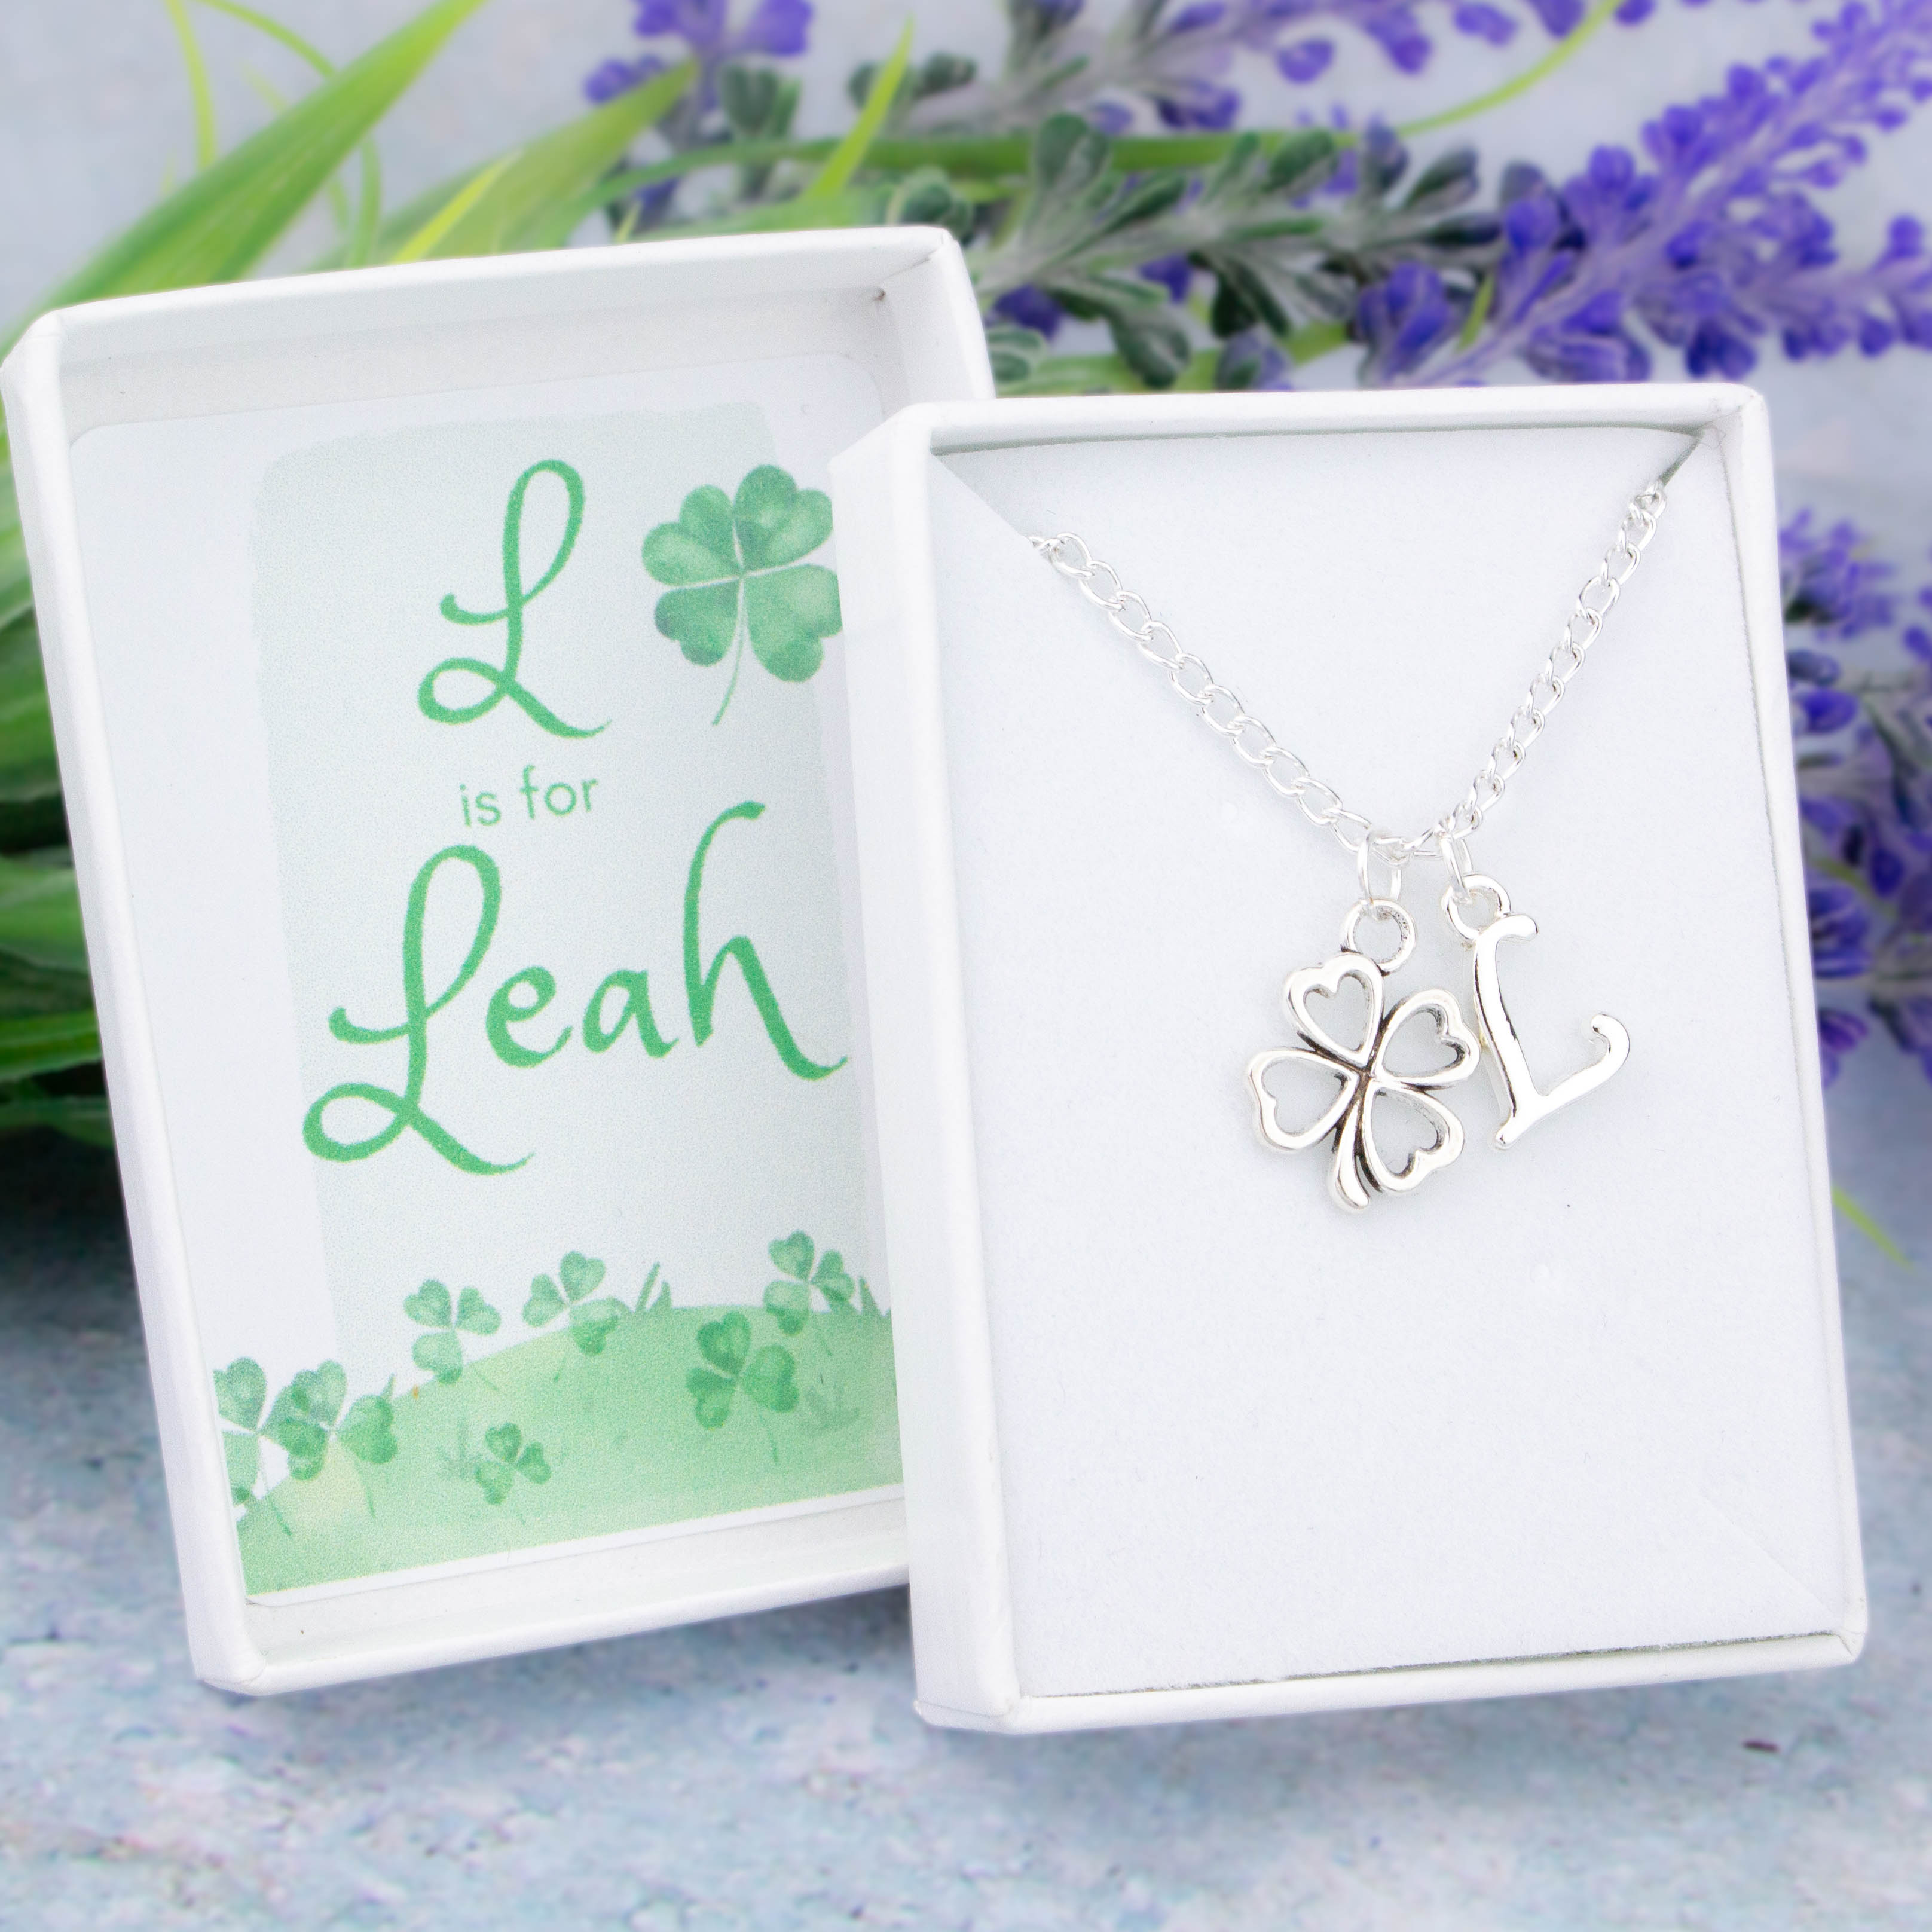 Wish Me Luck Necklace, Real Four-Leaf Clover Necklace